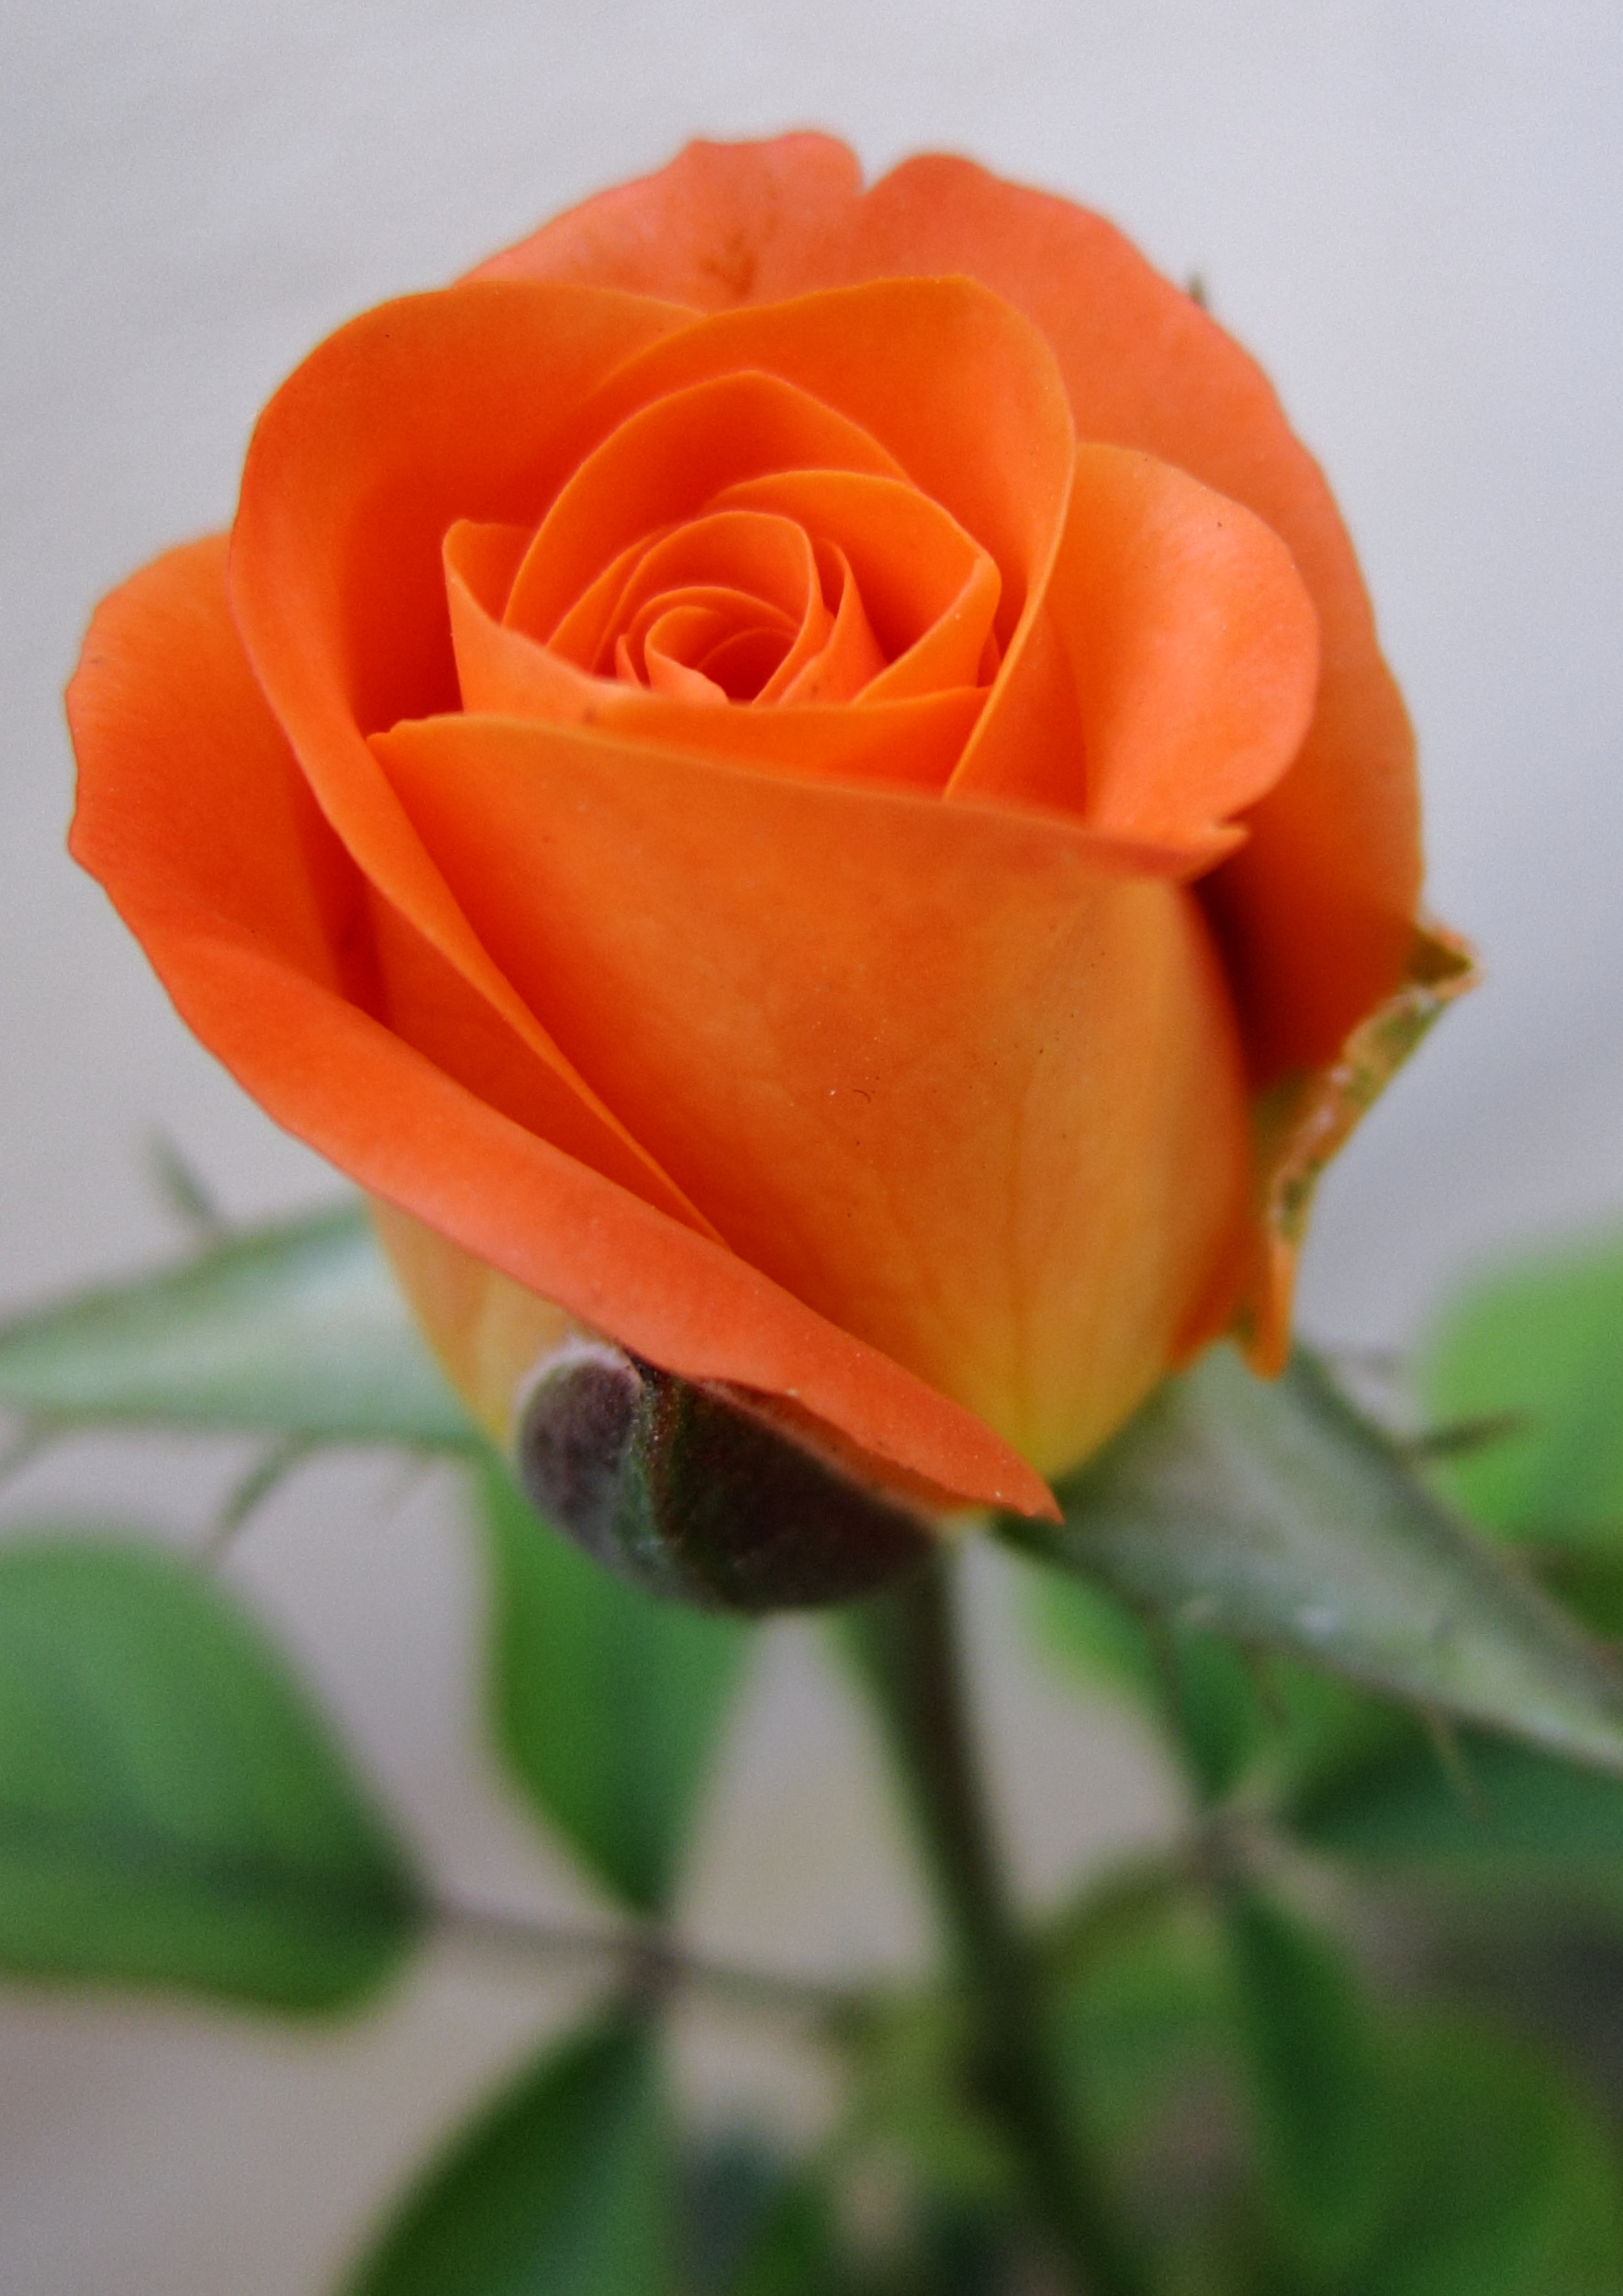 Which color rose to give this Rose Day? - Voylla